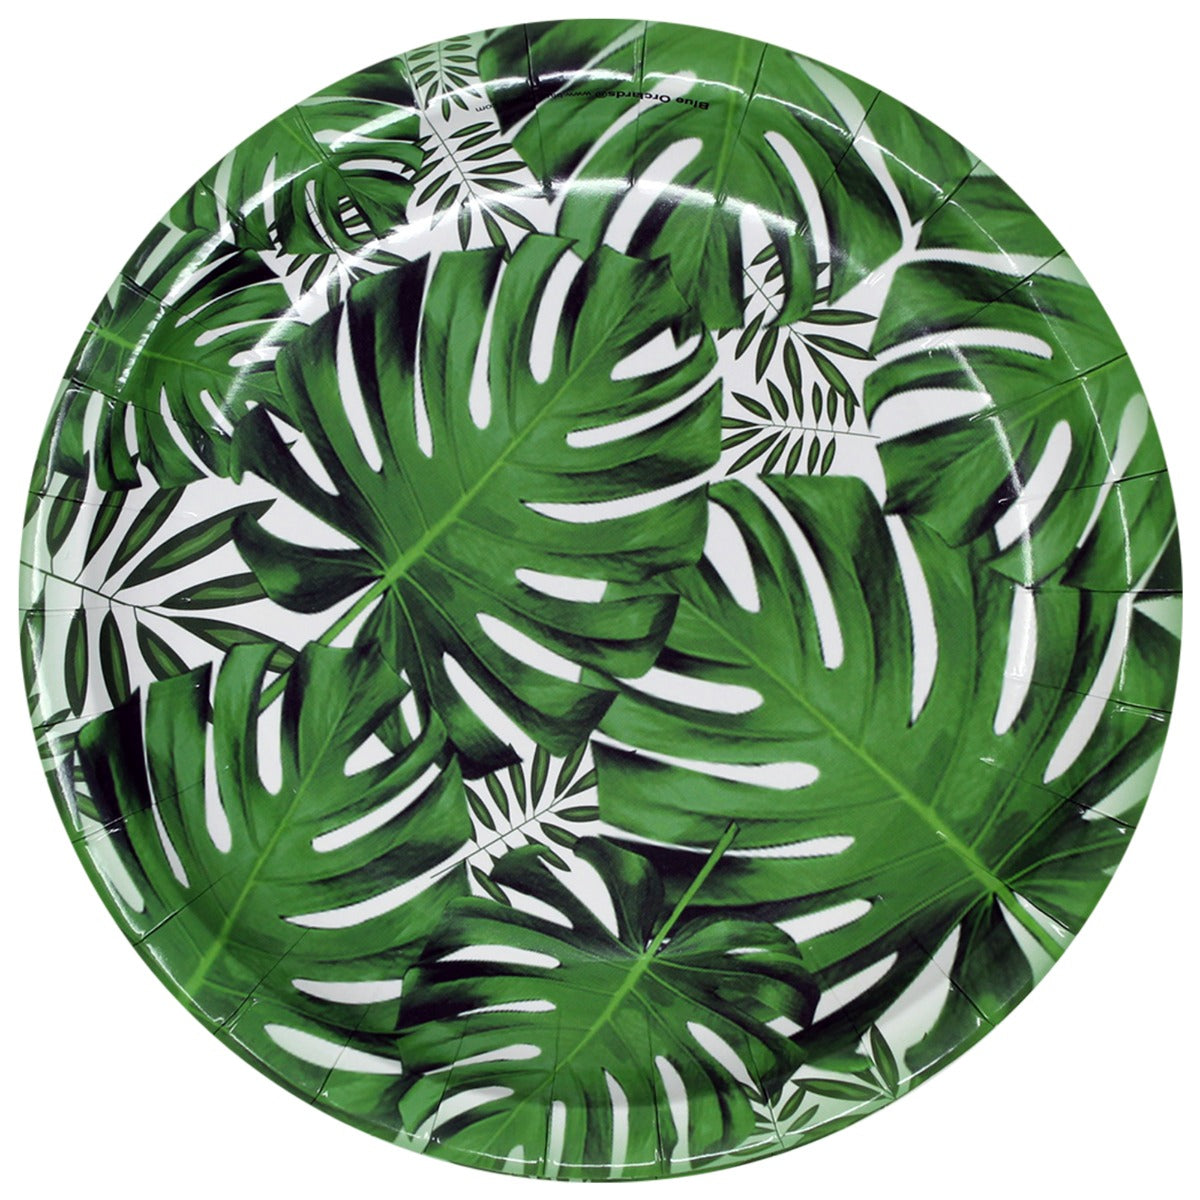 luau party plates
jungle birthday party supplies
hawaiian party decorations for adults
hawaiian decorations for party
hawaian luau party
jungle safari theme party decorations
tiki party supplies
tropical paper plates
tropical party plates
tropica